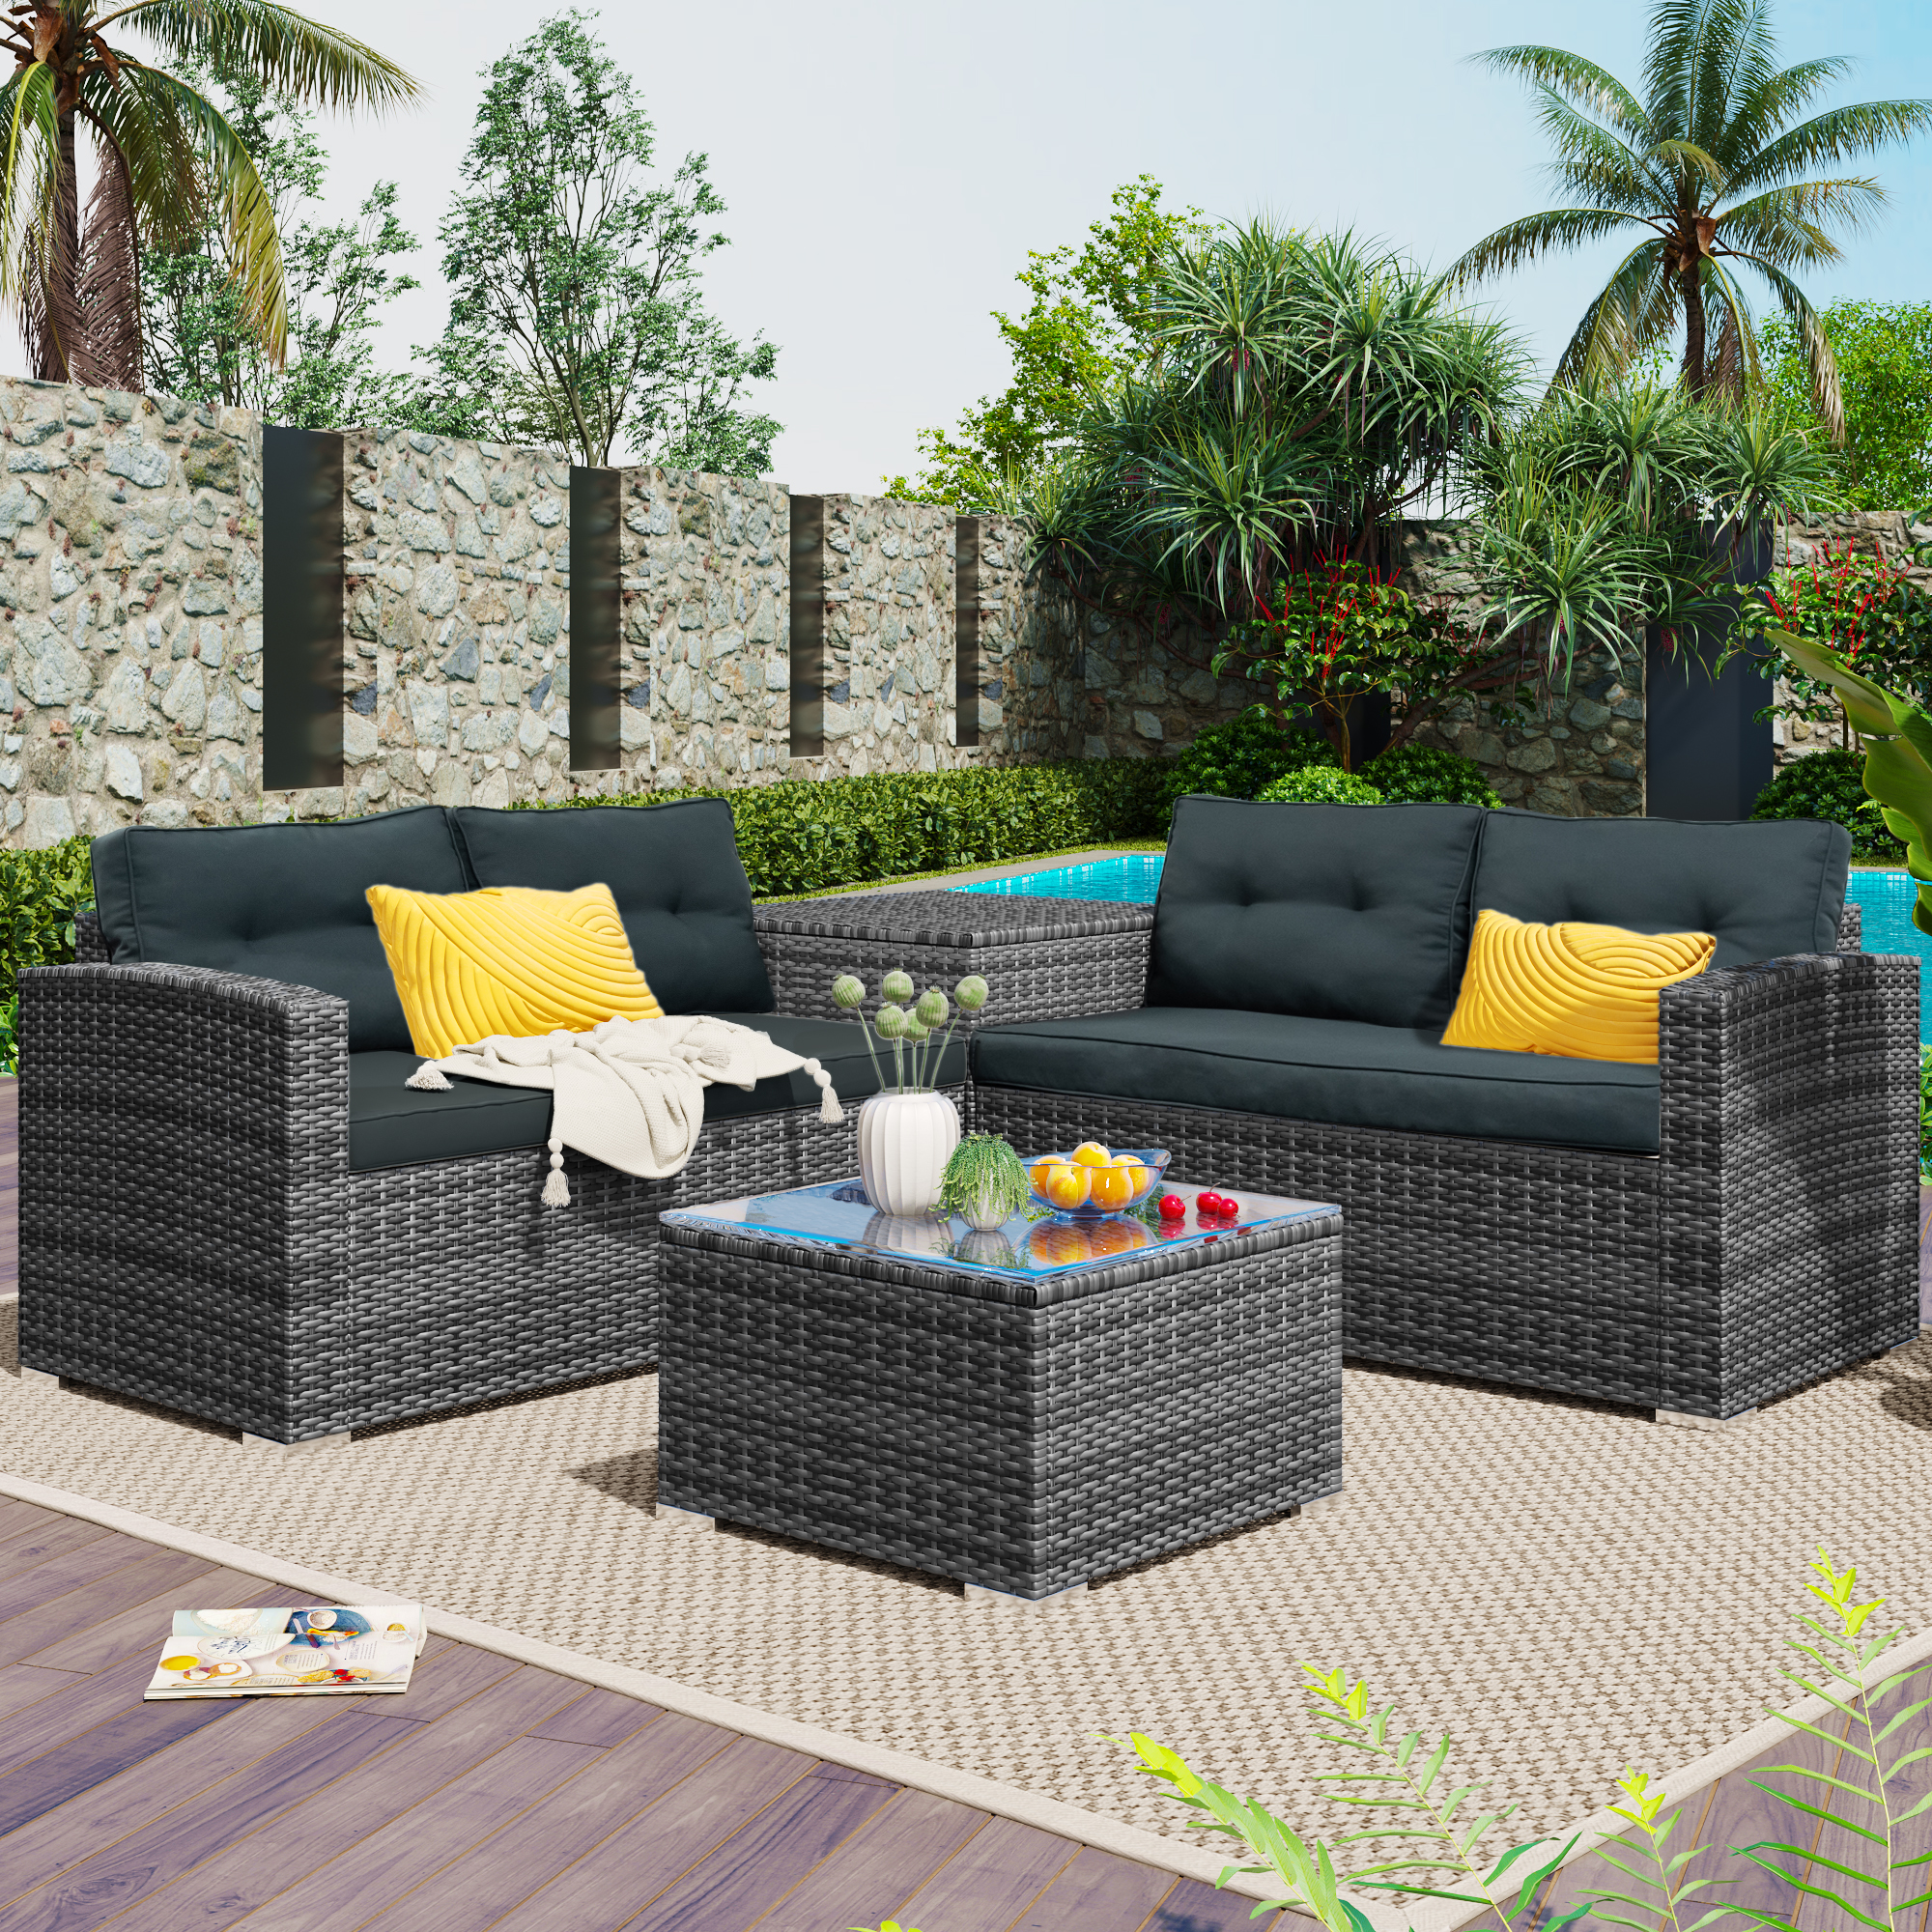 UHOMEPRO Outdoor Patio Furniture Set, 4-Piece PE Rattan Wicker Patio Dining Table Set, Outdoor Conversation Sets with Glass Coffee Table, Patio Bistro Set for Backyard Porch Garden Poolside, Q13783 - image 1 of 12